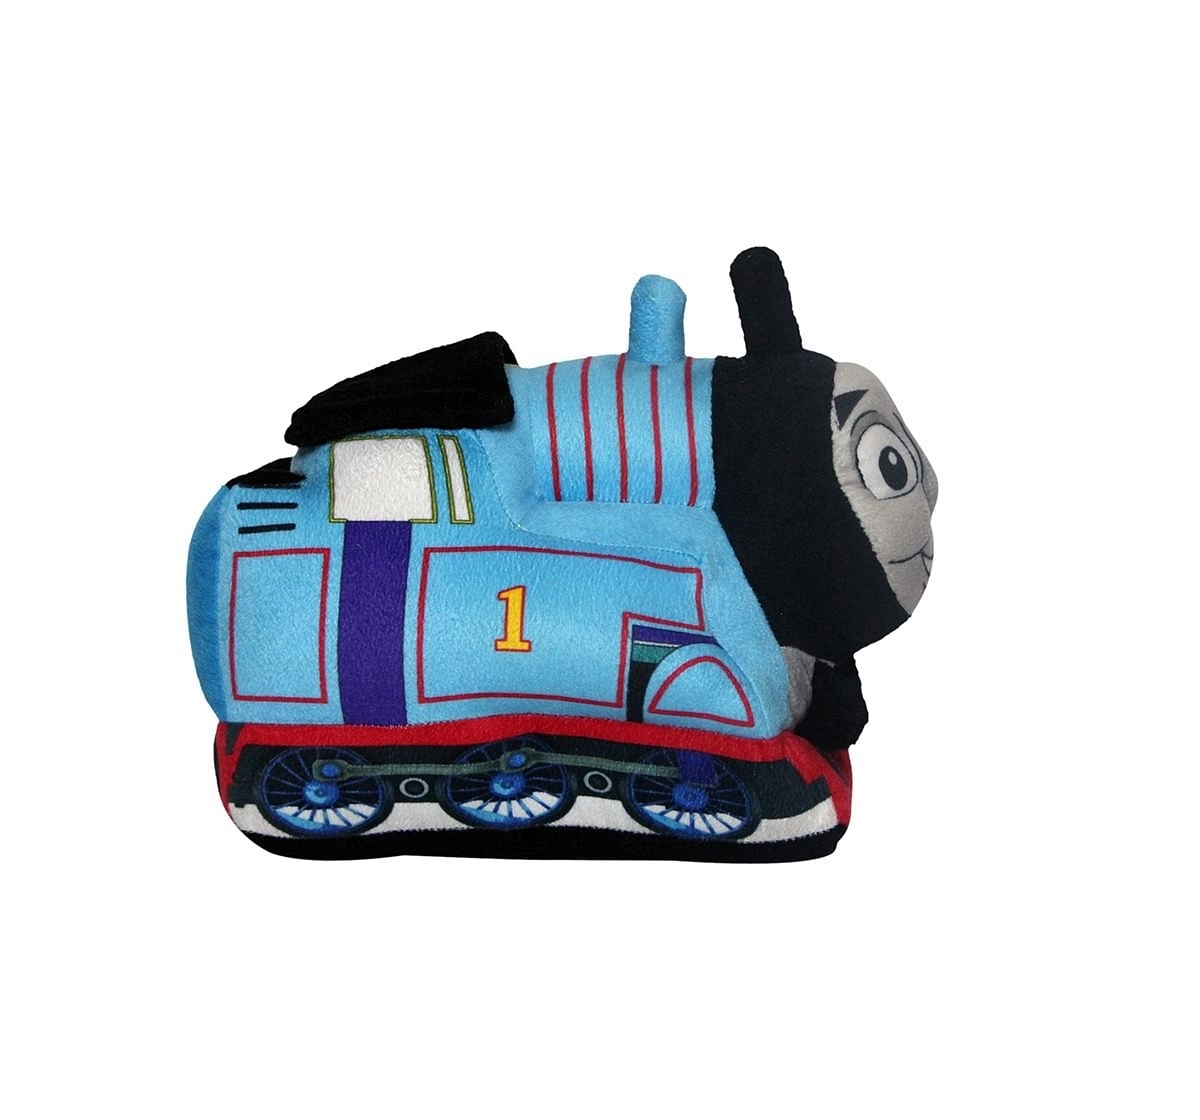 Thomas & Friends Plush Engine Large Character Soft Toys for Kids age 12M+ - 25.4 Cm 